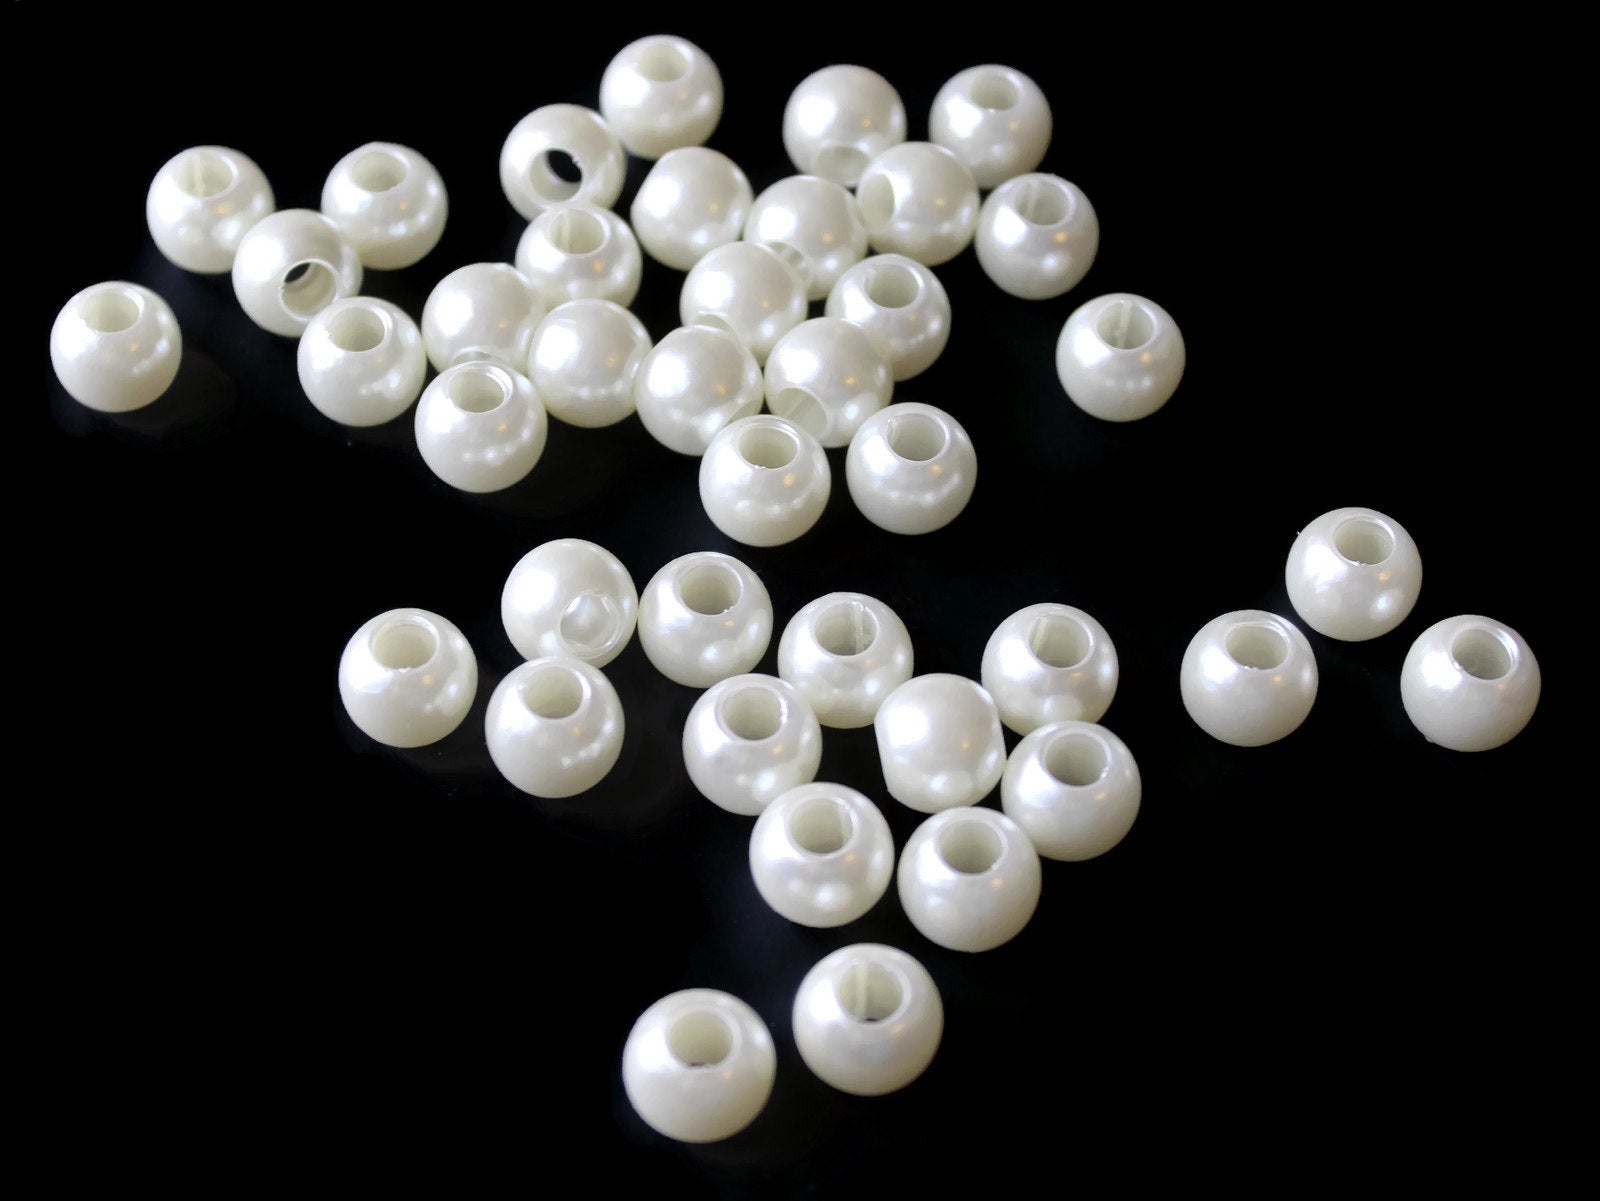 TOAOB 1400pcs Pearl Beads 4mm to 12mm White Pearls Craft Beads Loose Round  Faux Pearl Beads with Holes for Home Decoration Necklaces Bracelets